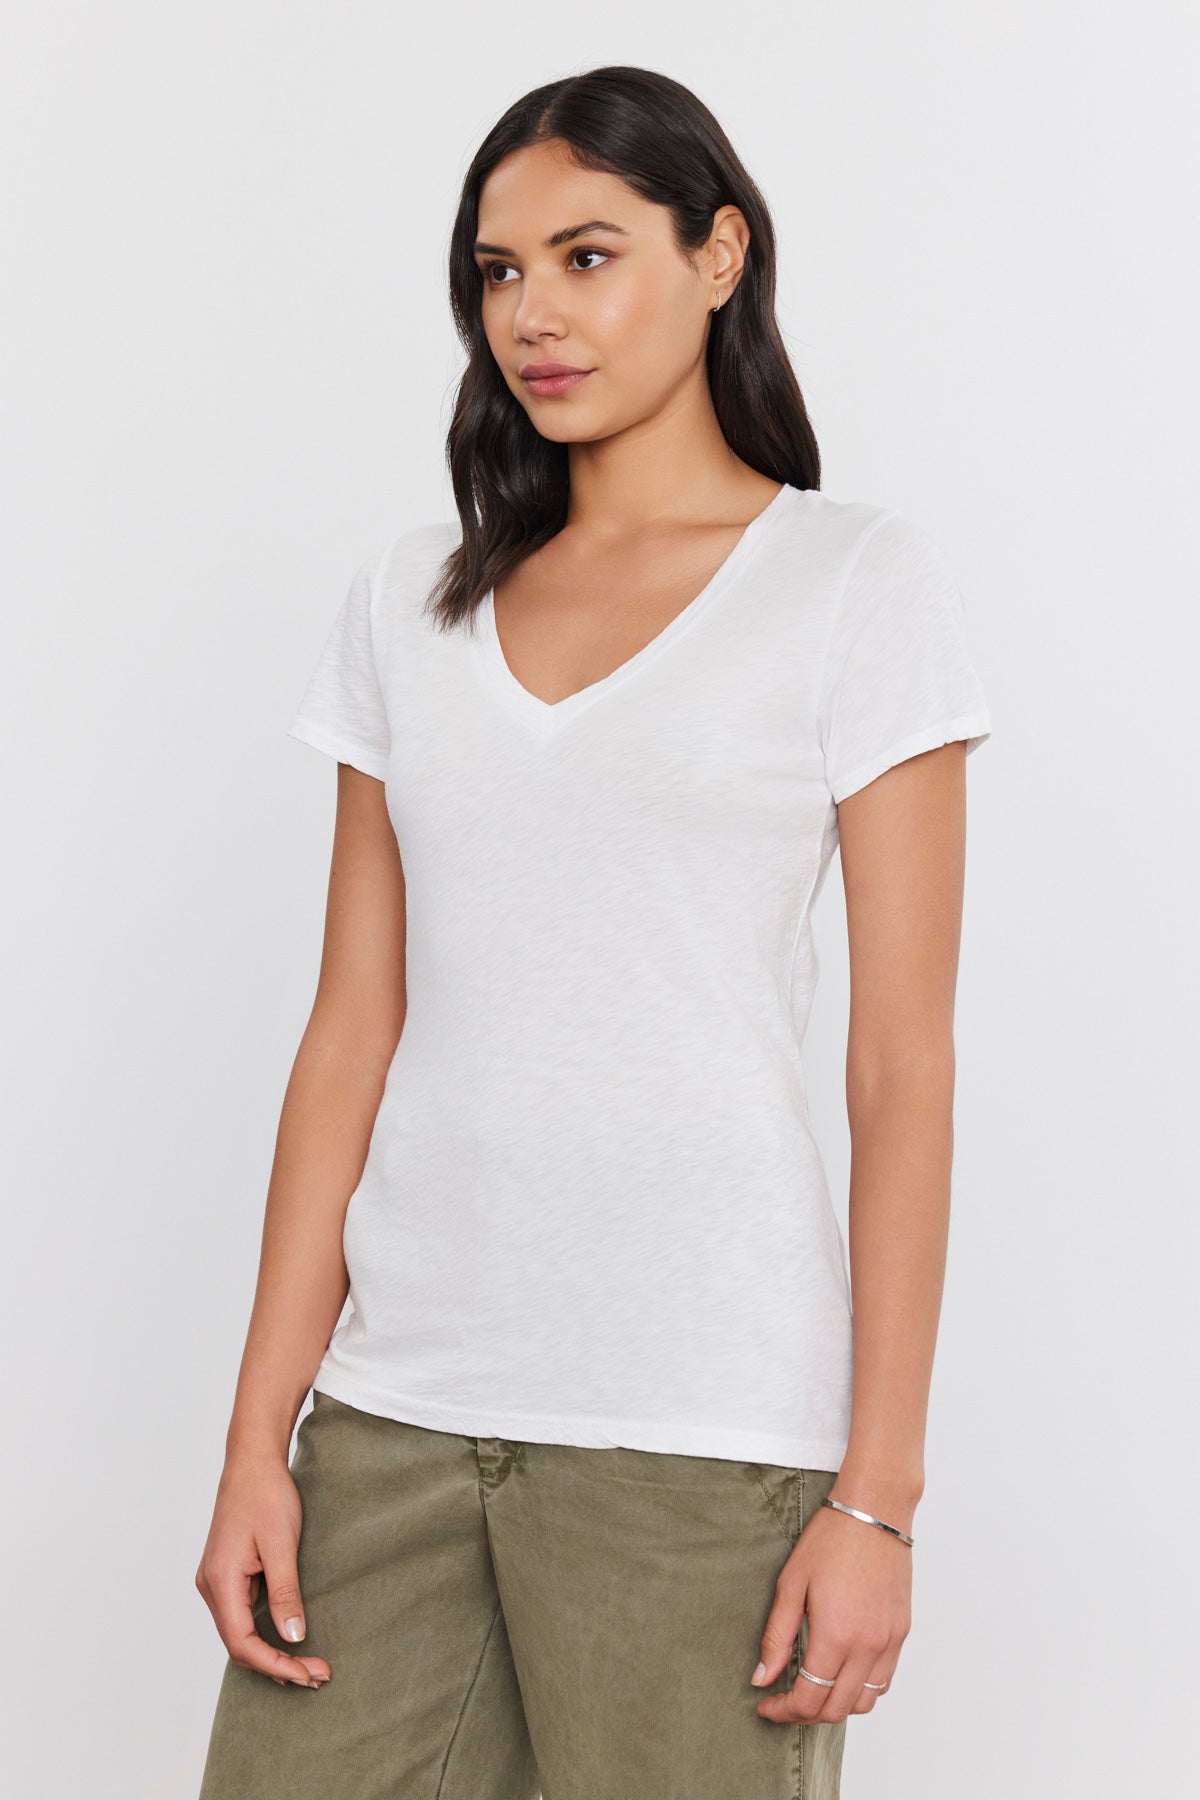 The Velvet by Graham & Spencer LILITH COTTON SLUB V-NECK TEE showcases a preppy style and is made of luxe cotton slub.-35586083455169